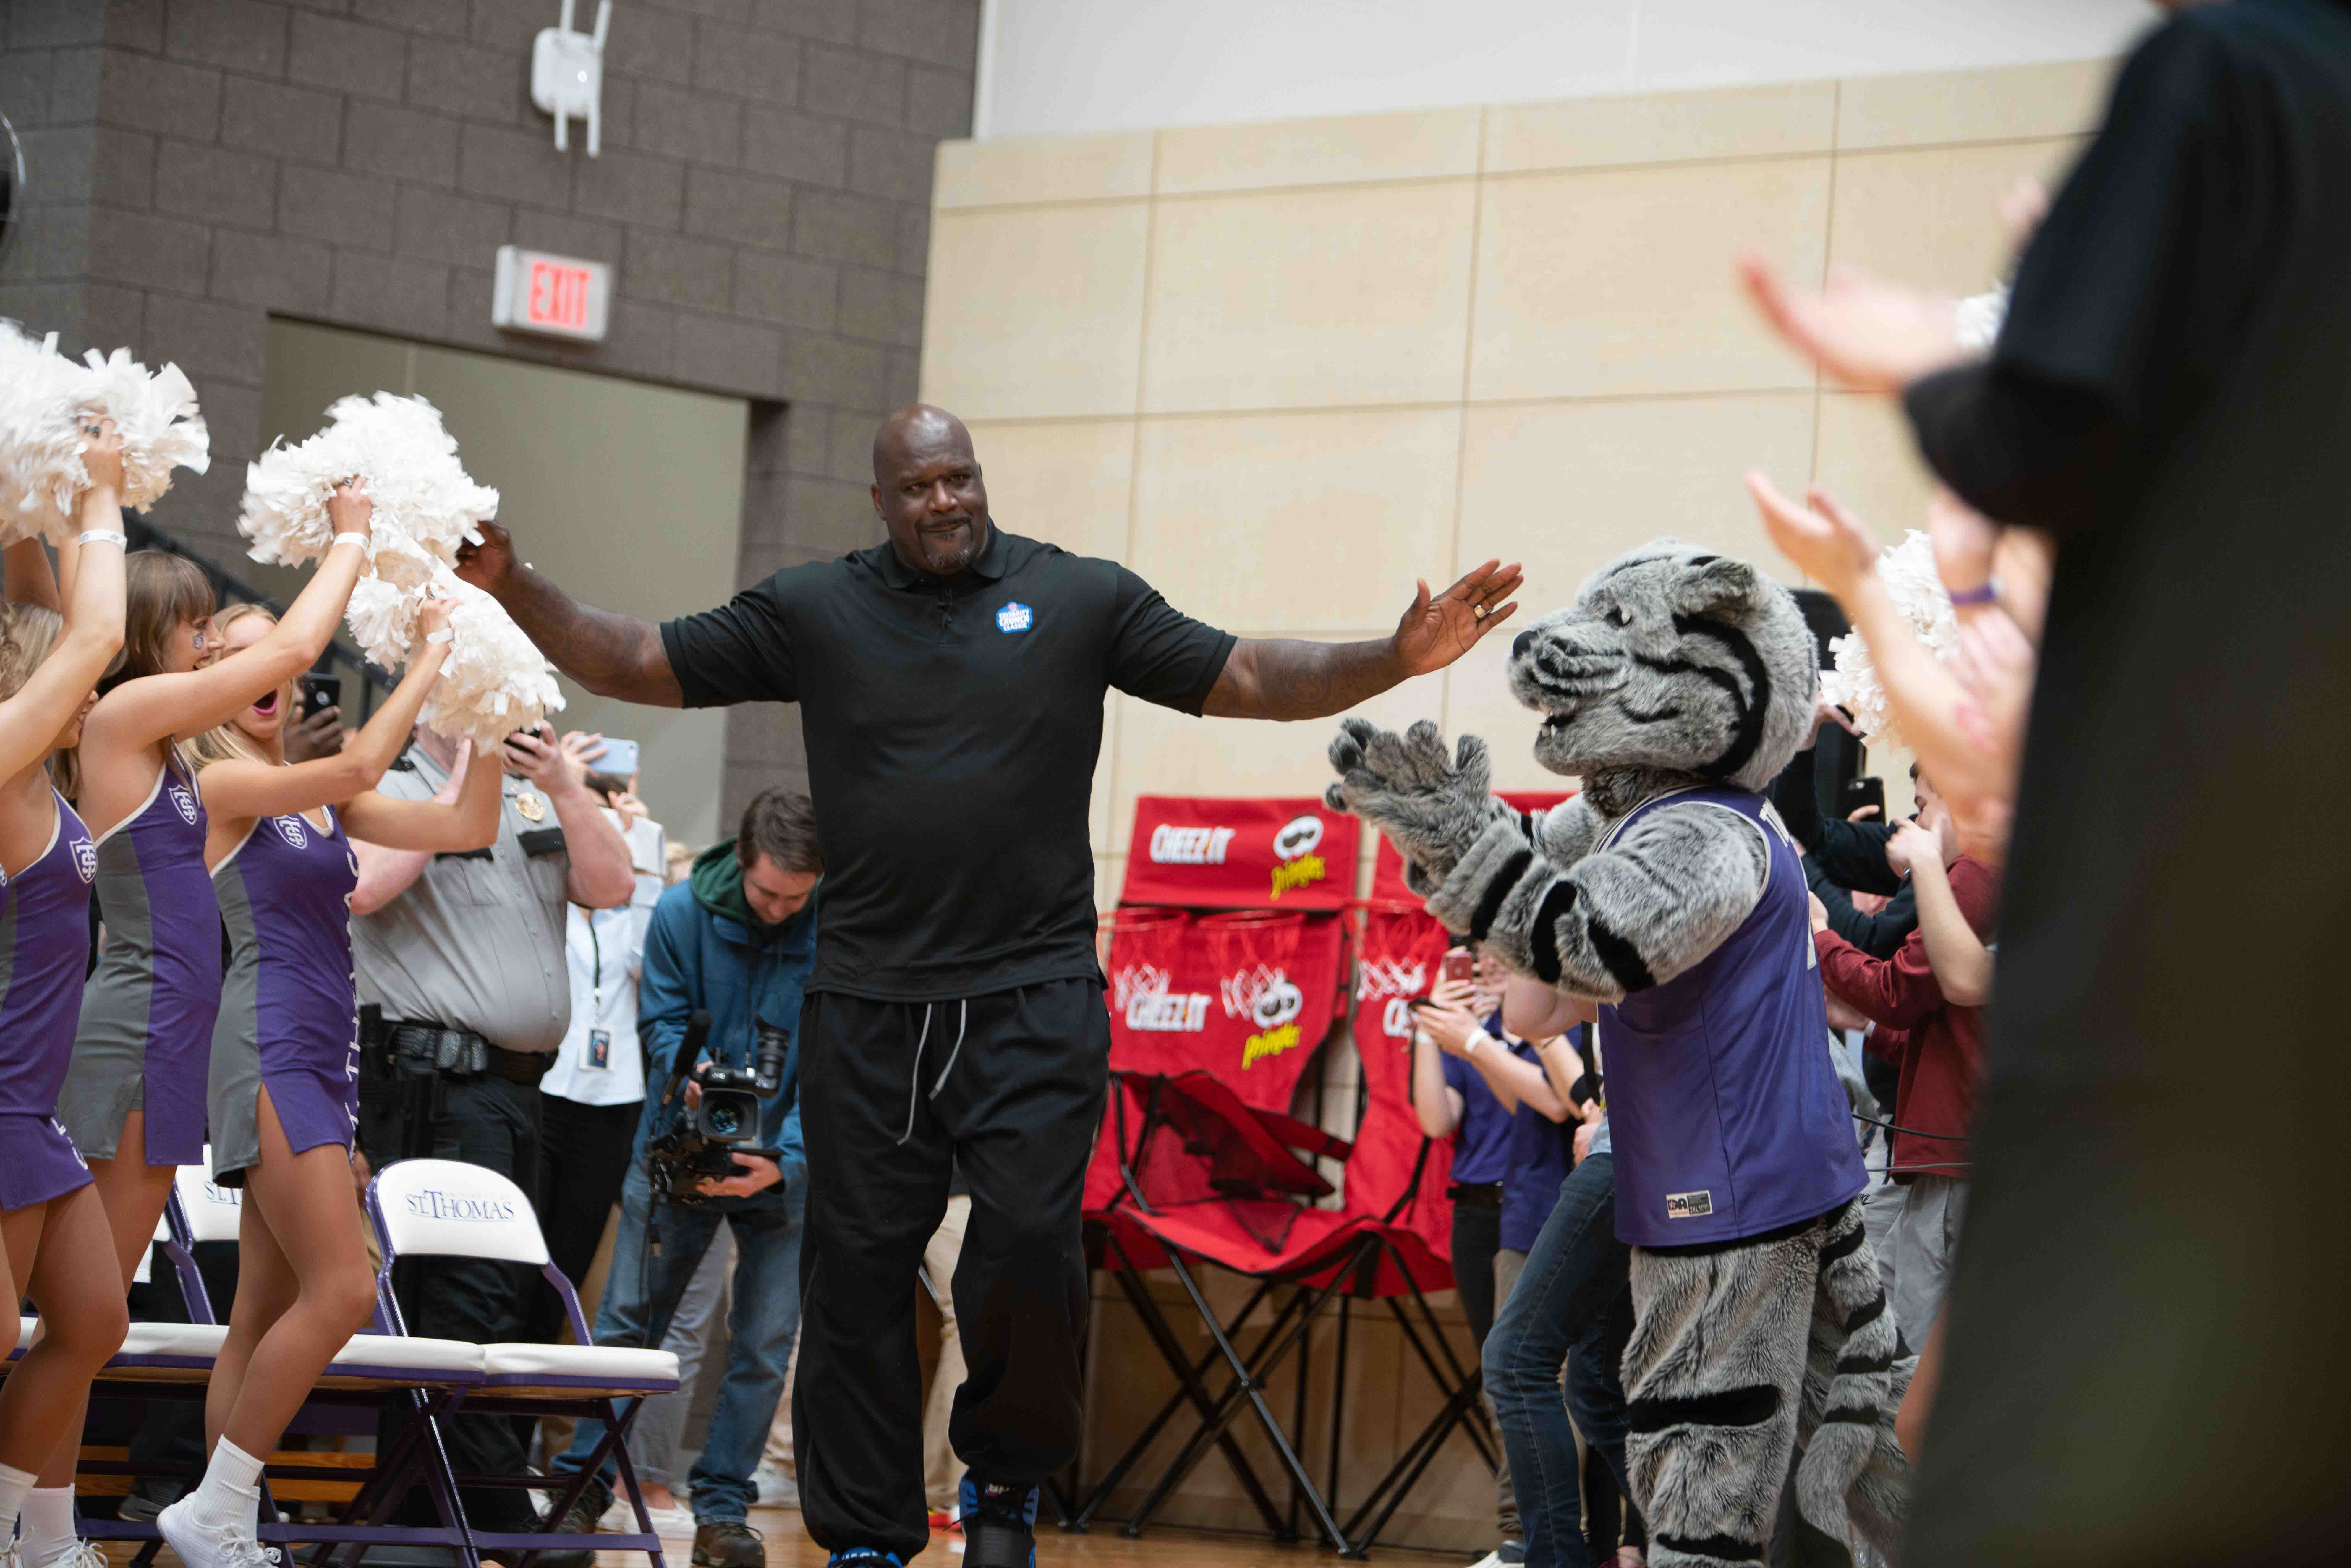 Shaquille O'Neal high fiving St. Thomas fans